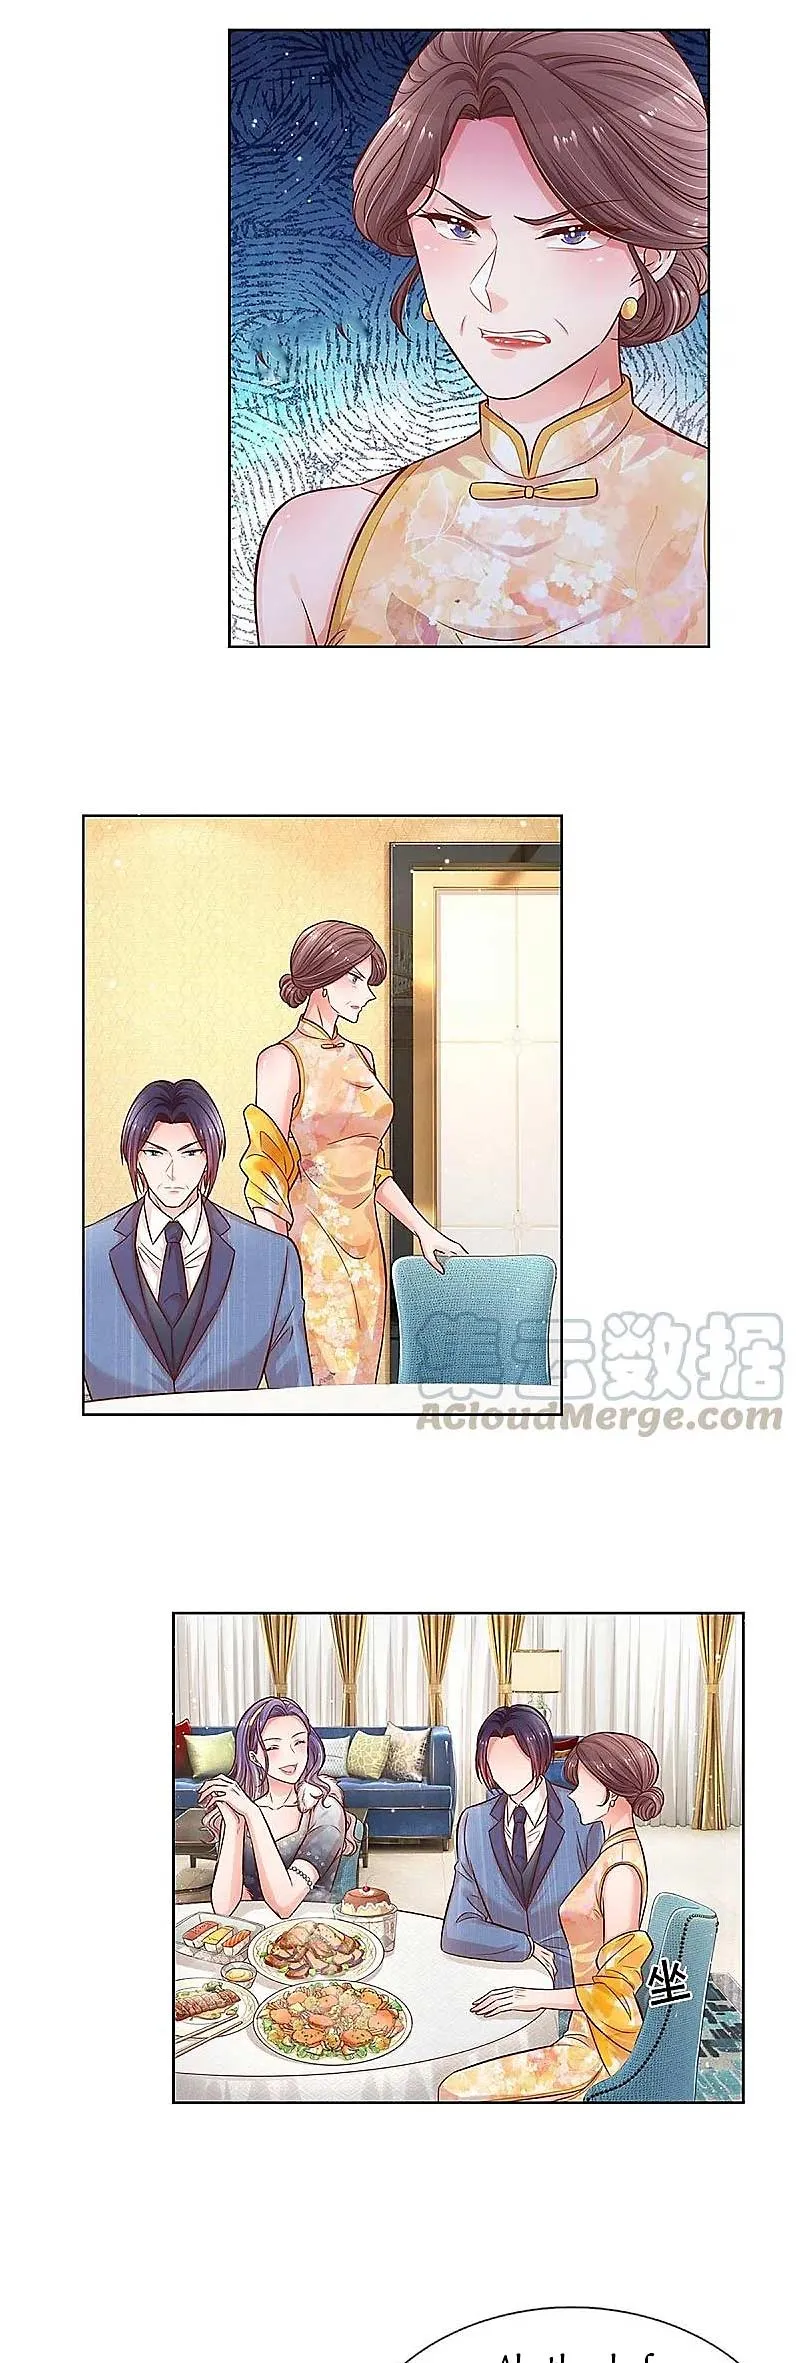 Sweet EscapE - chapter 297 - #5